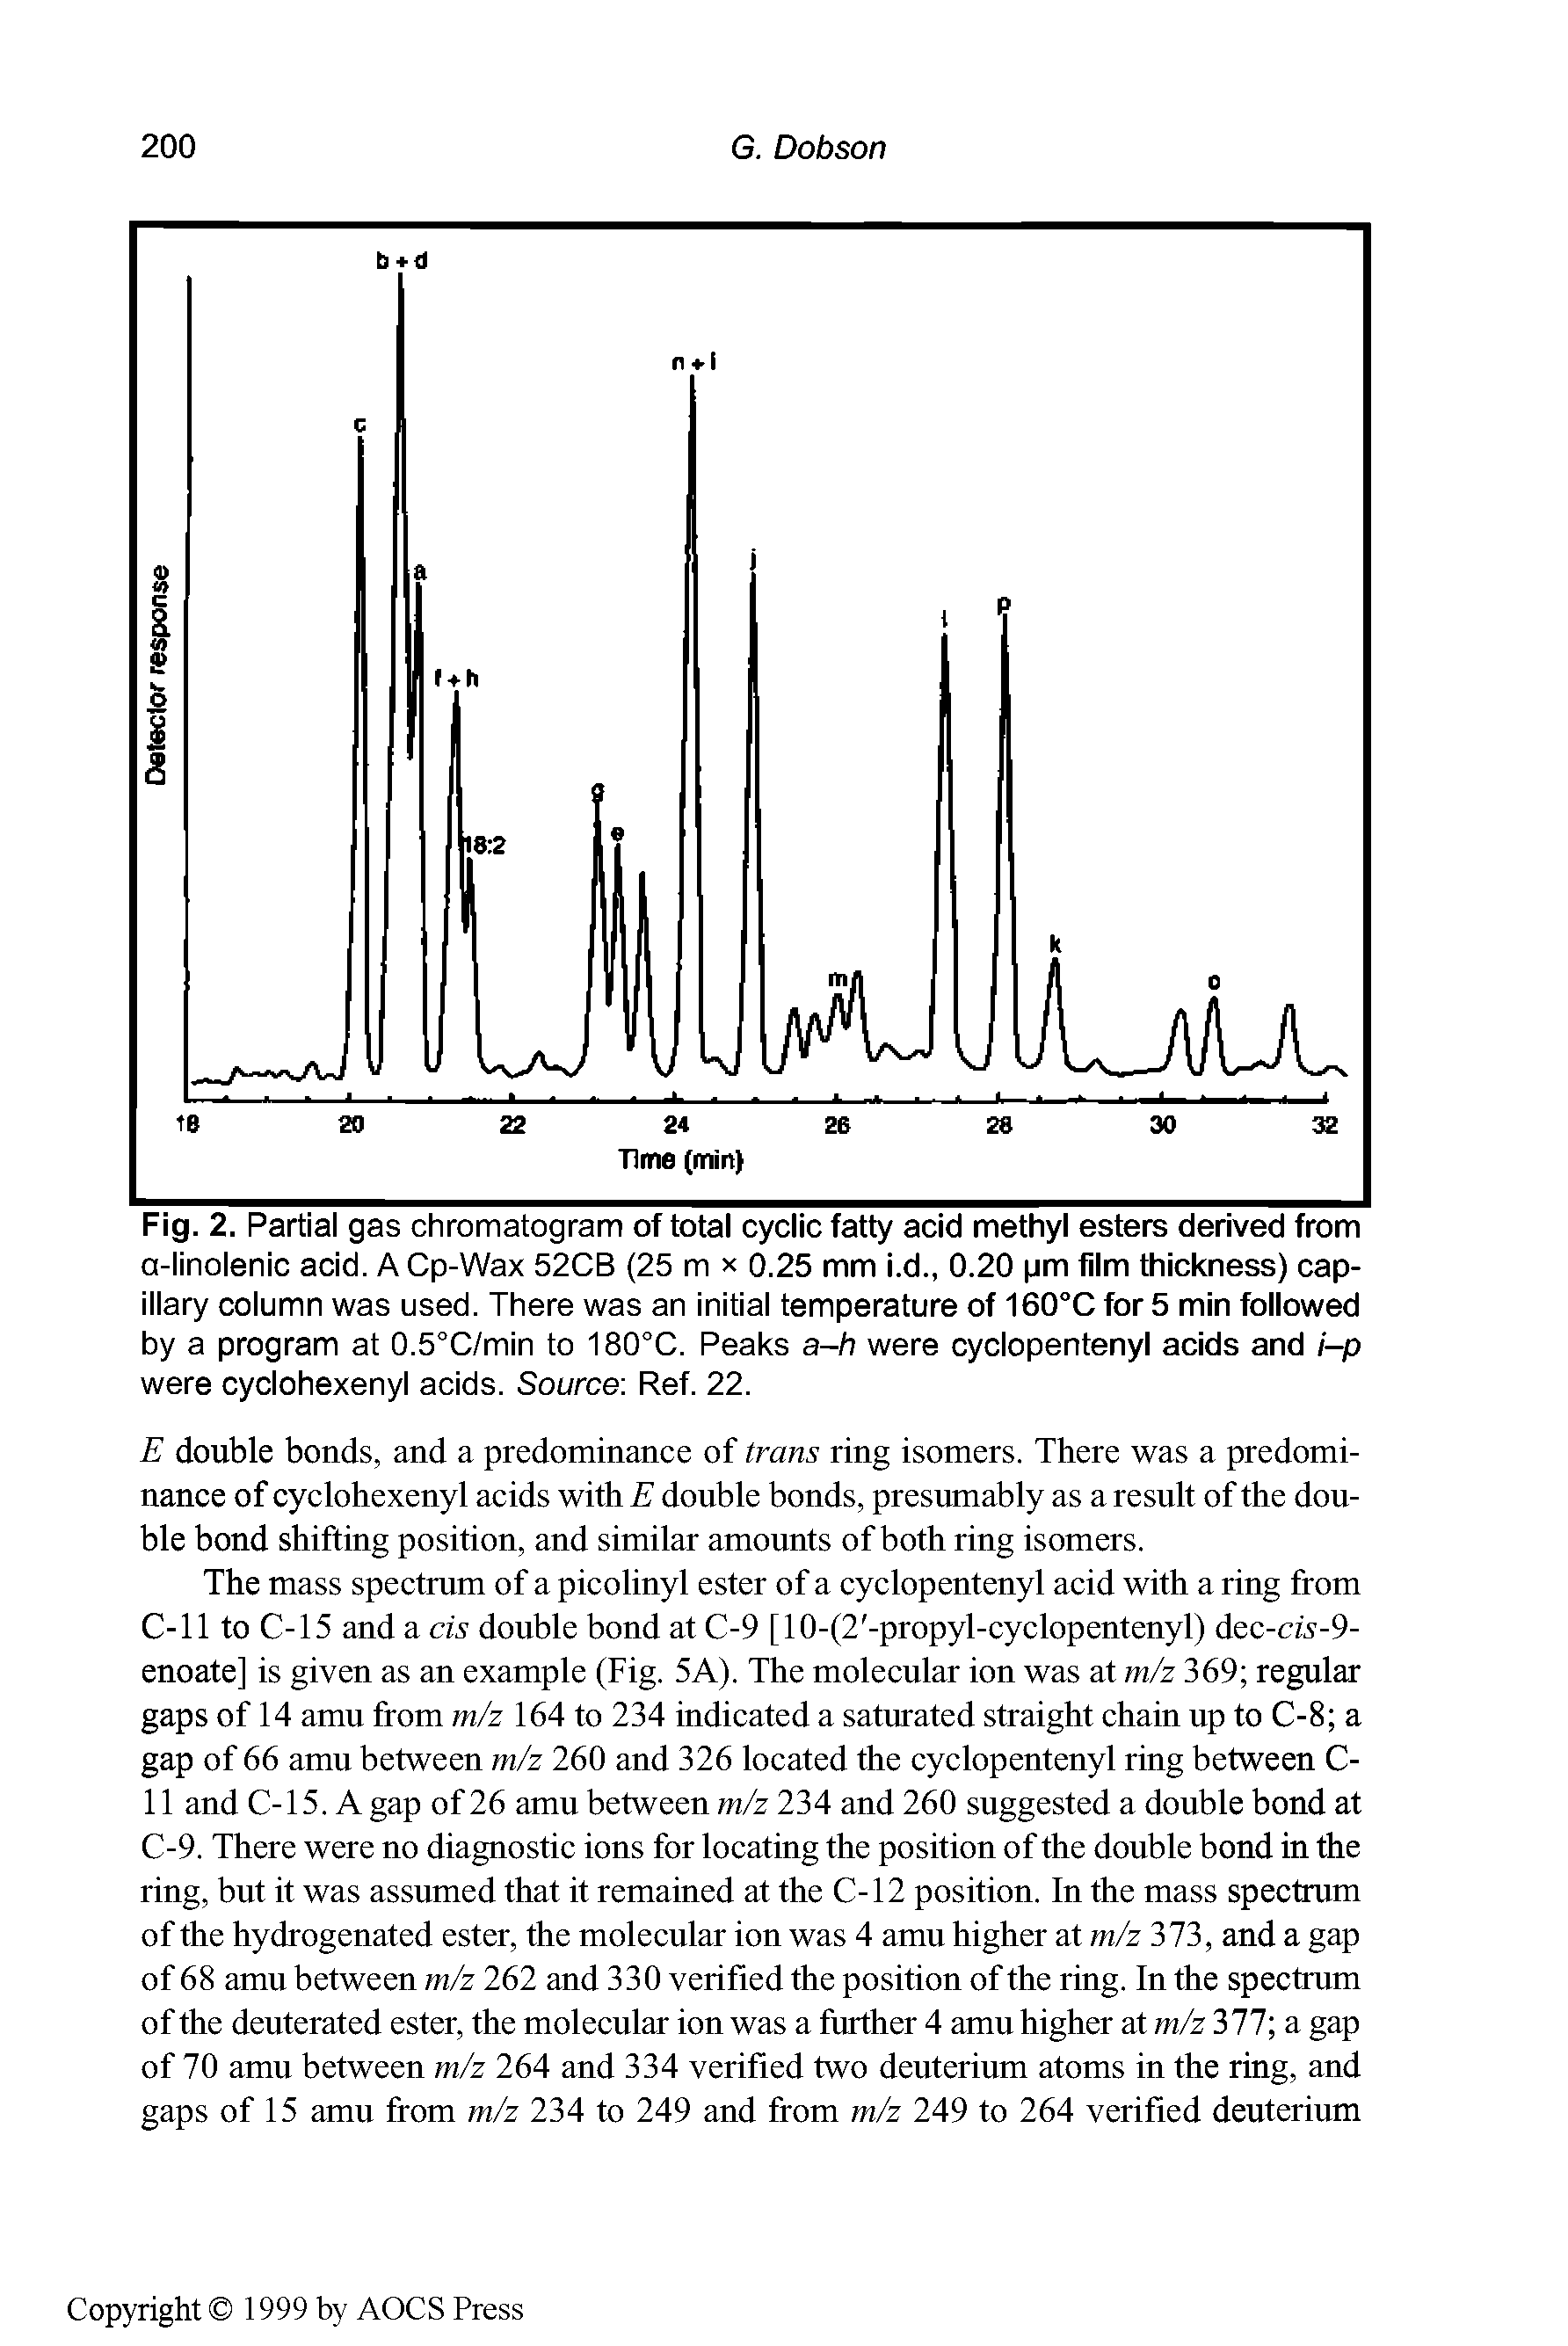 Fig. 2. Partial gas chromatogram of total cyclic fatty acid methyl esters derived from a-linolenic acid. A Cp-Wax 52CB (25 m x 0.25 mm i.d., 0.20 pm film thickness) capillary column was used. There was an initial temperature of 160°C for 5 min followed by a program at 0.5°C/min to 180°C. Peaks a-h were cyclopentenyl acids and i-p were cyclohexenyl acids. Source Ref. 22.